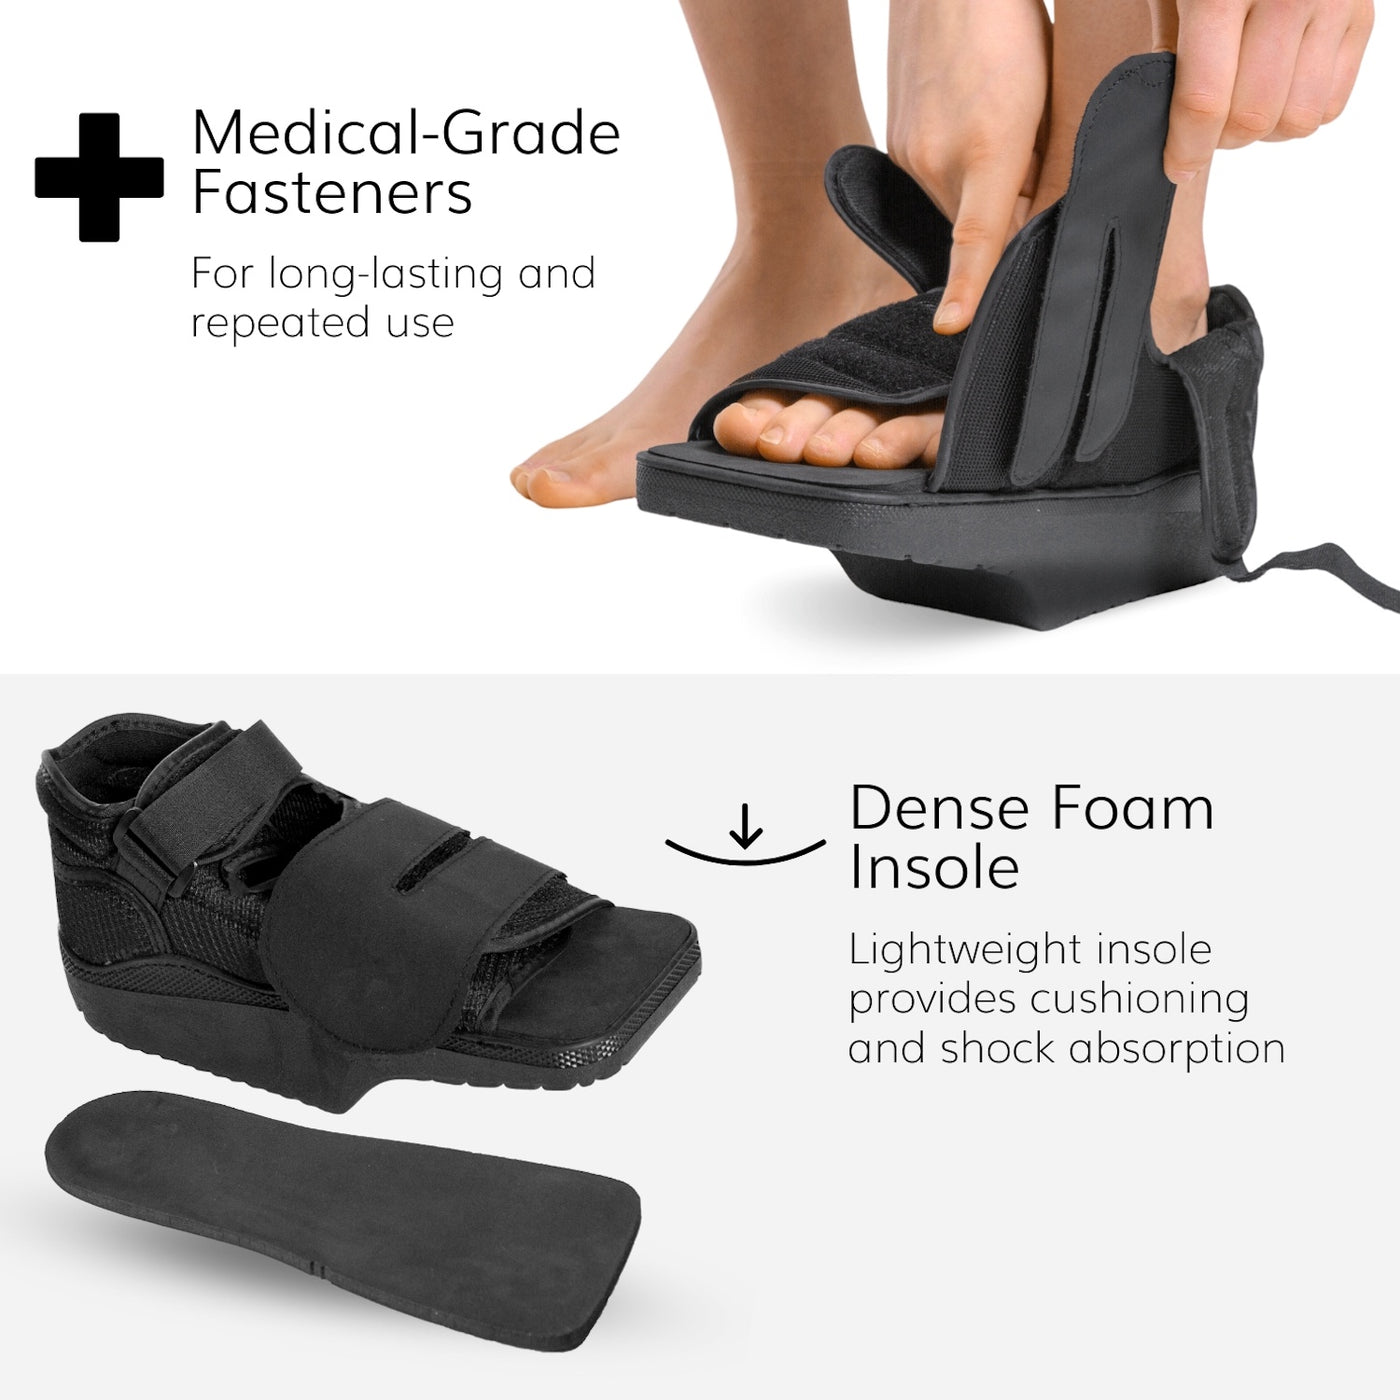 The adjustable darco wedge shoe has adjustable straps to accommodate bandaging from diabetic foot ulcers and after surgery